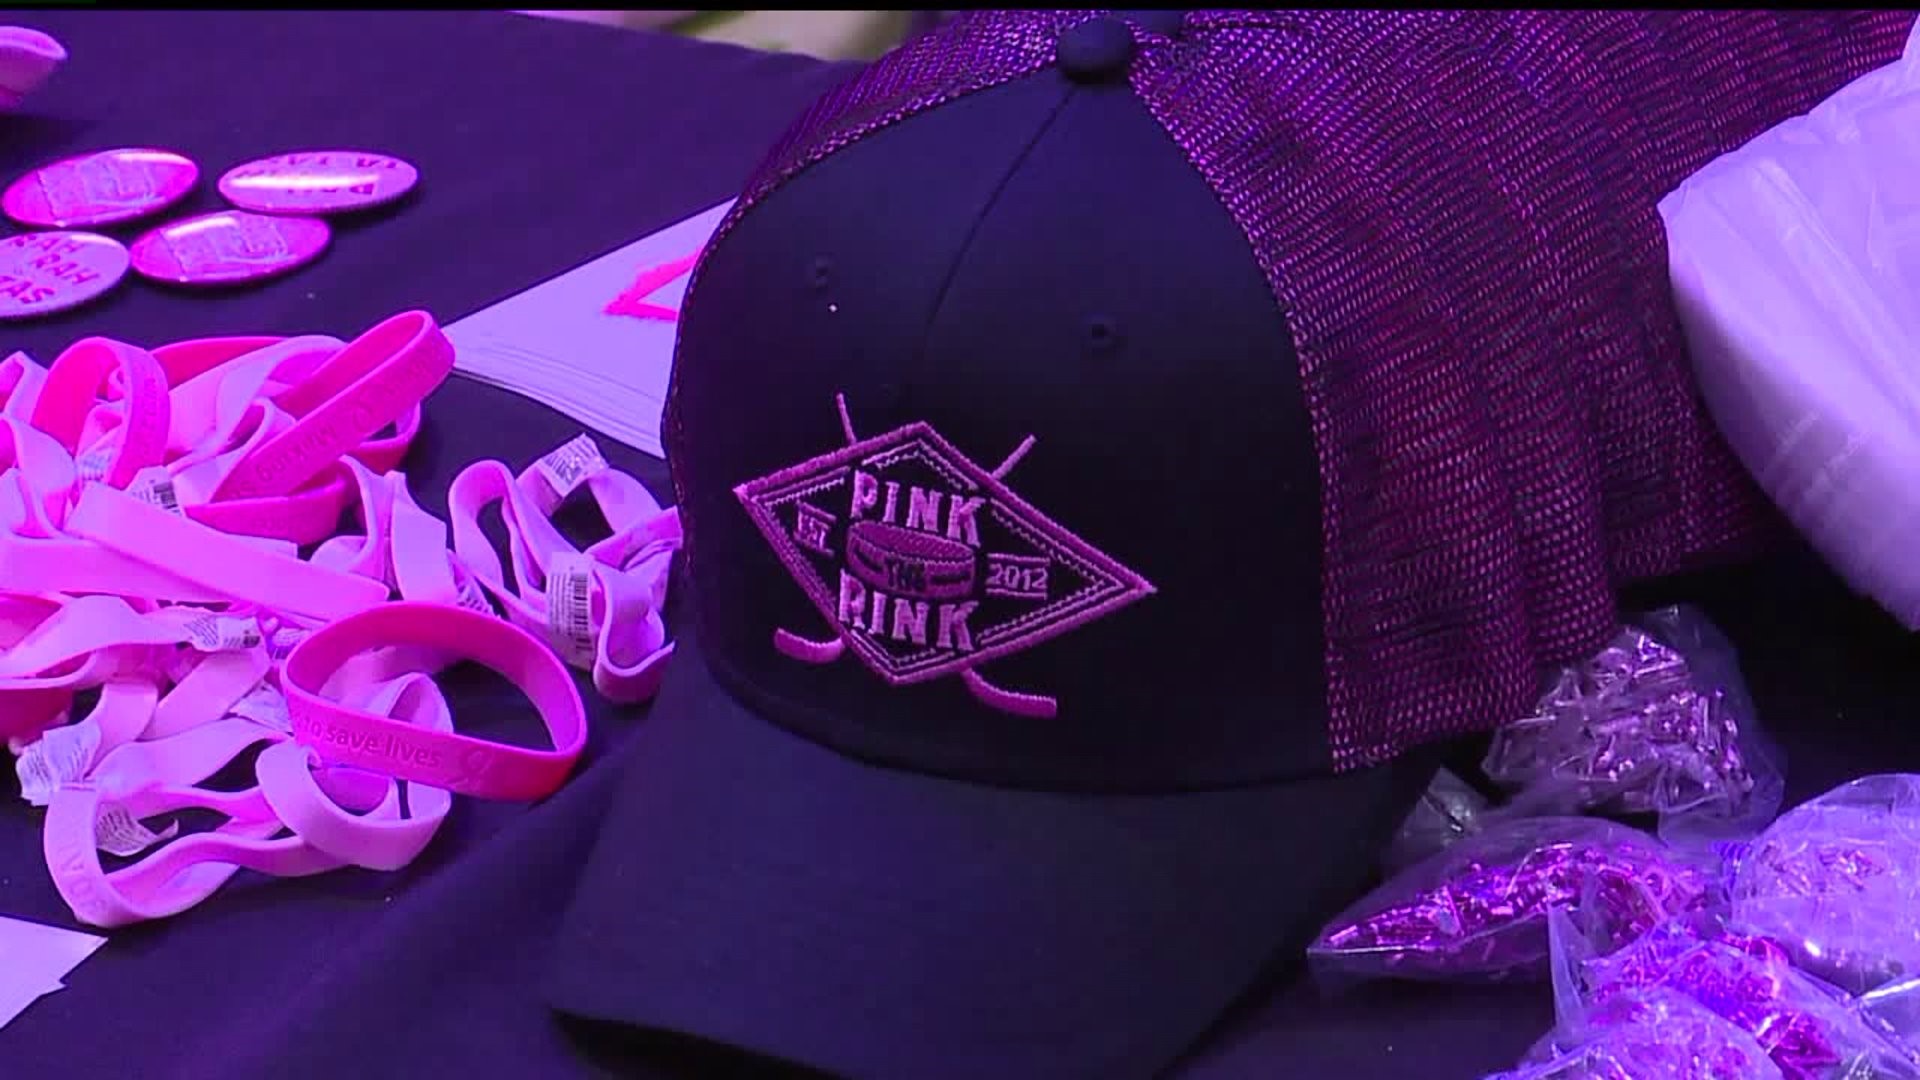 Hershey Bears Pink The Rink raises money for American Cancer Society